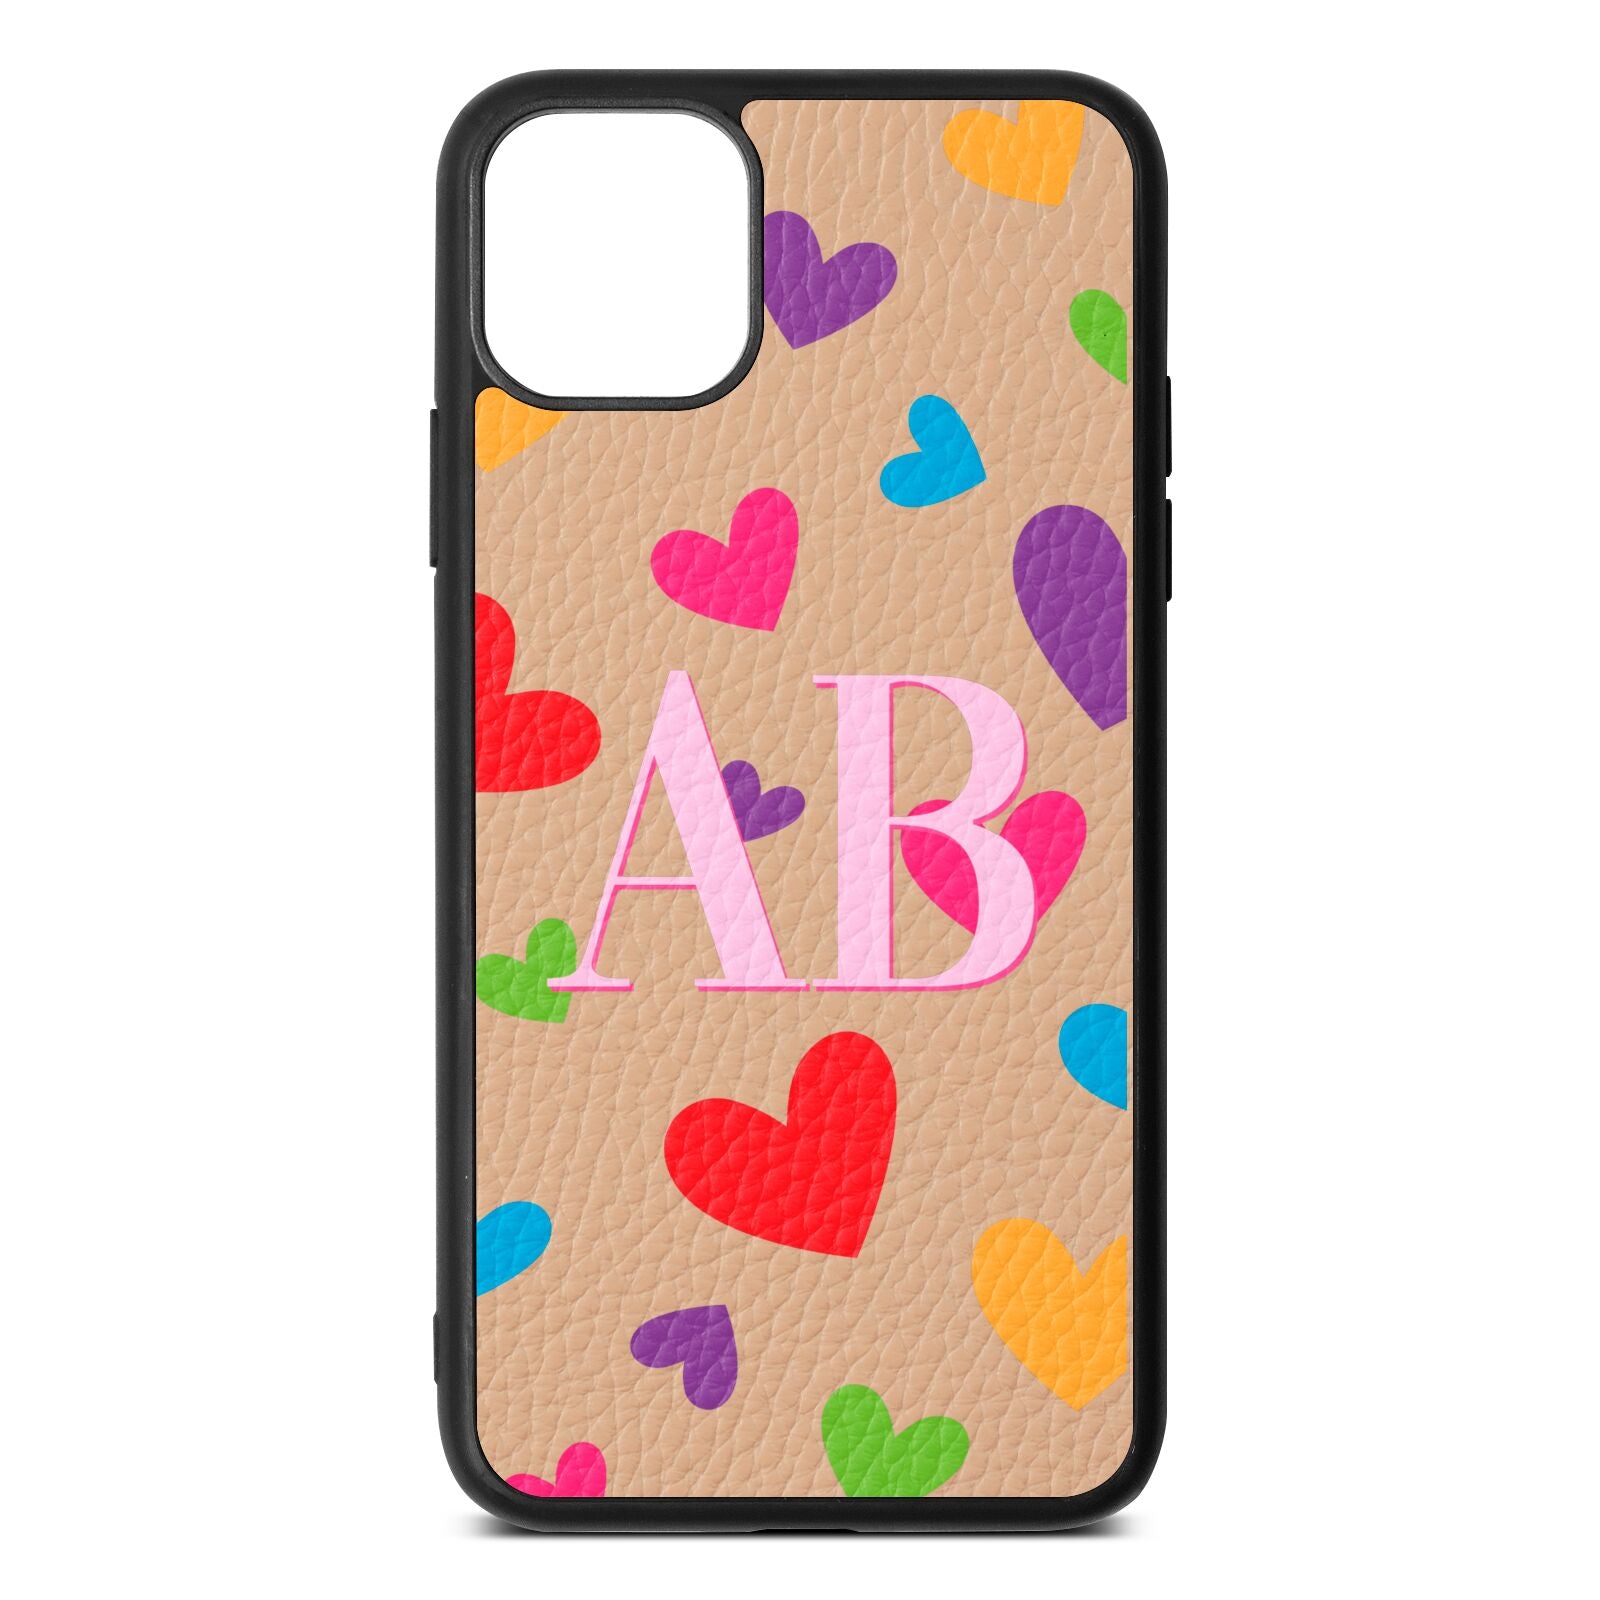 Contrast Initials Heart Print Nude Pebble Leather iPhone 11 Pro Max Case